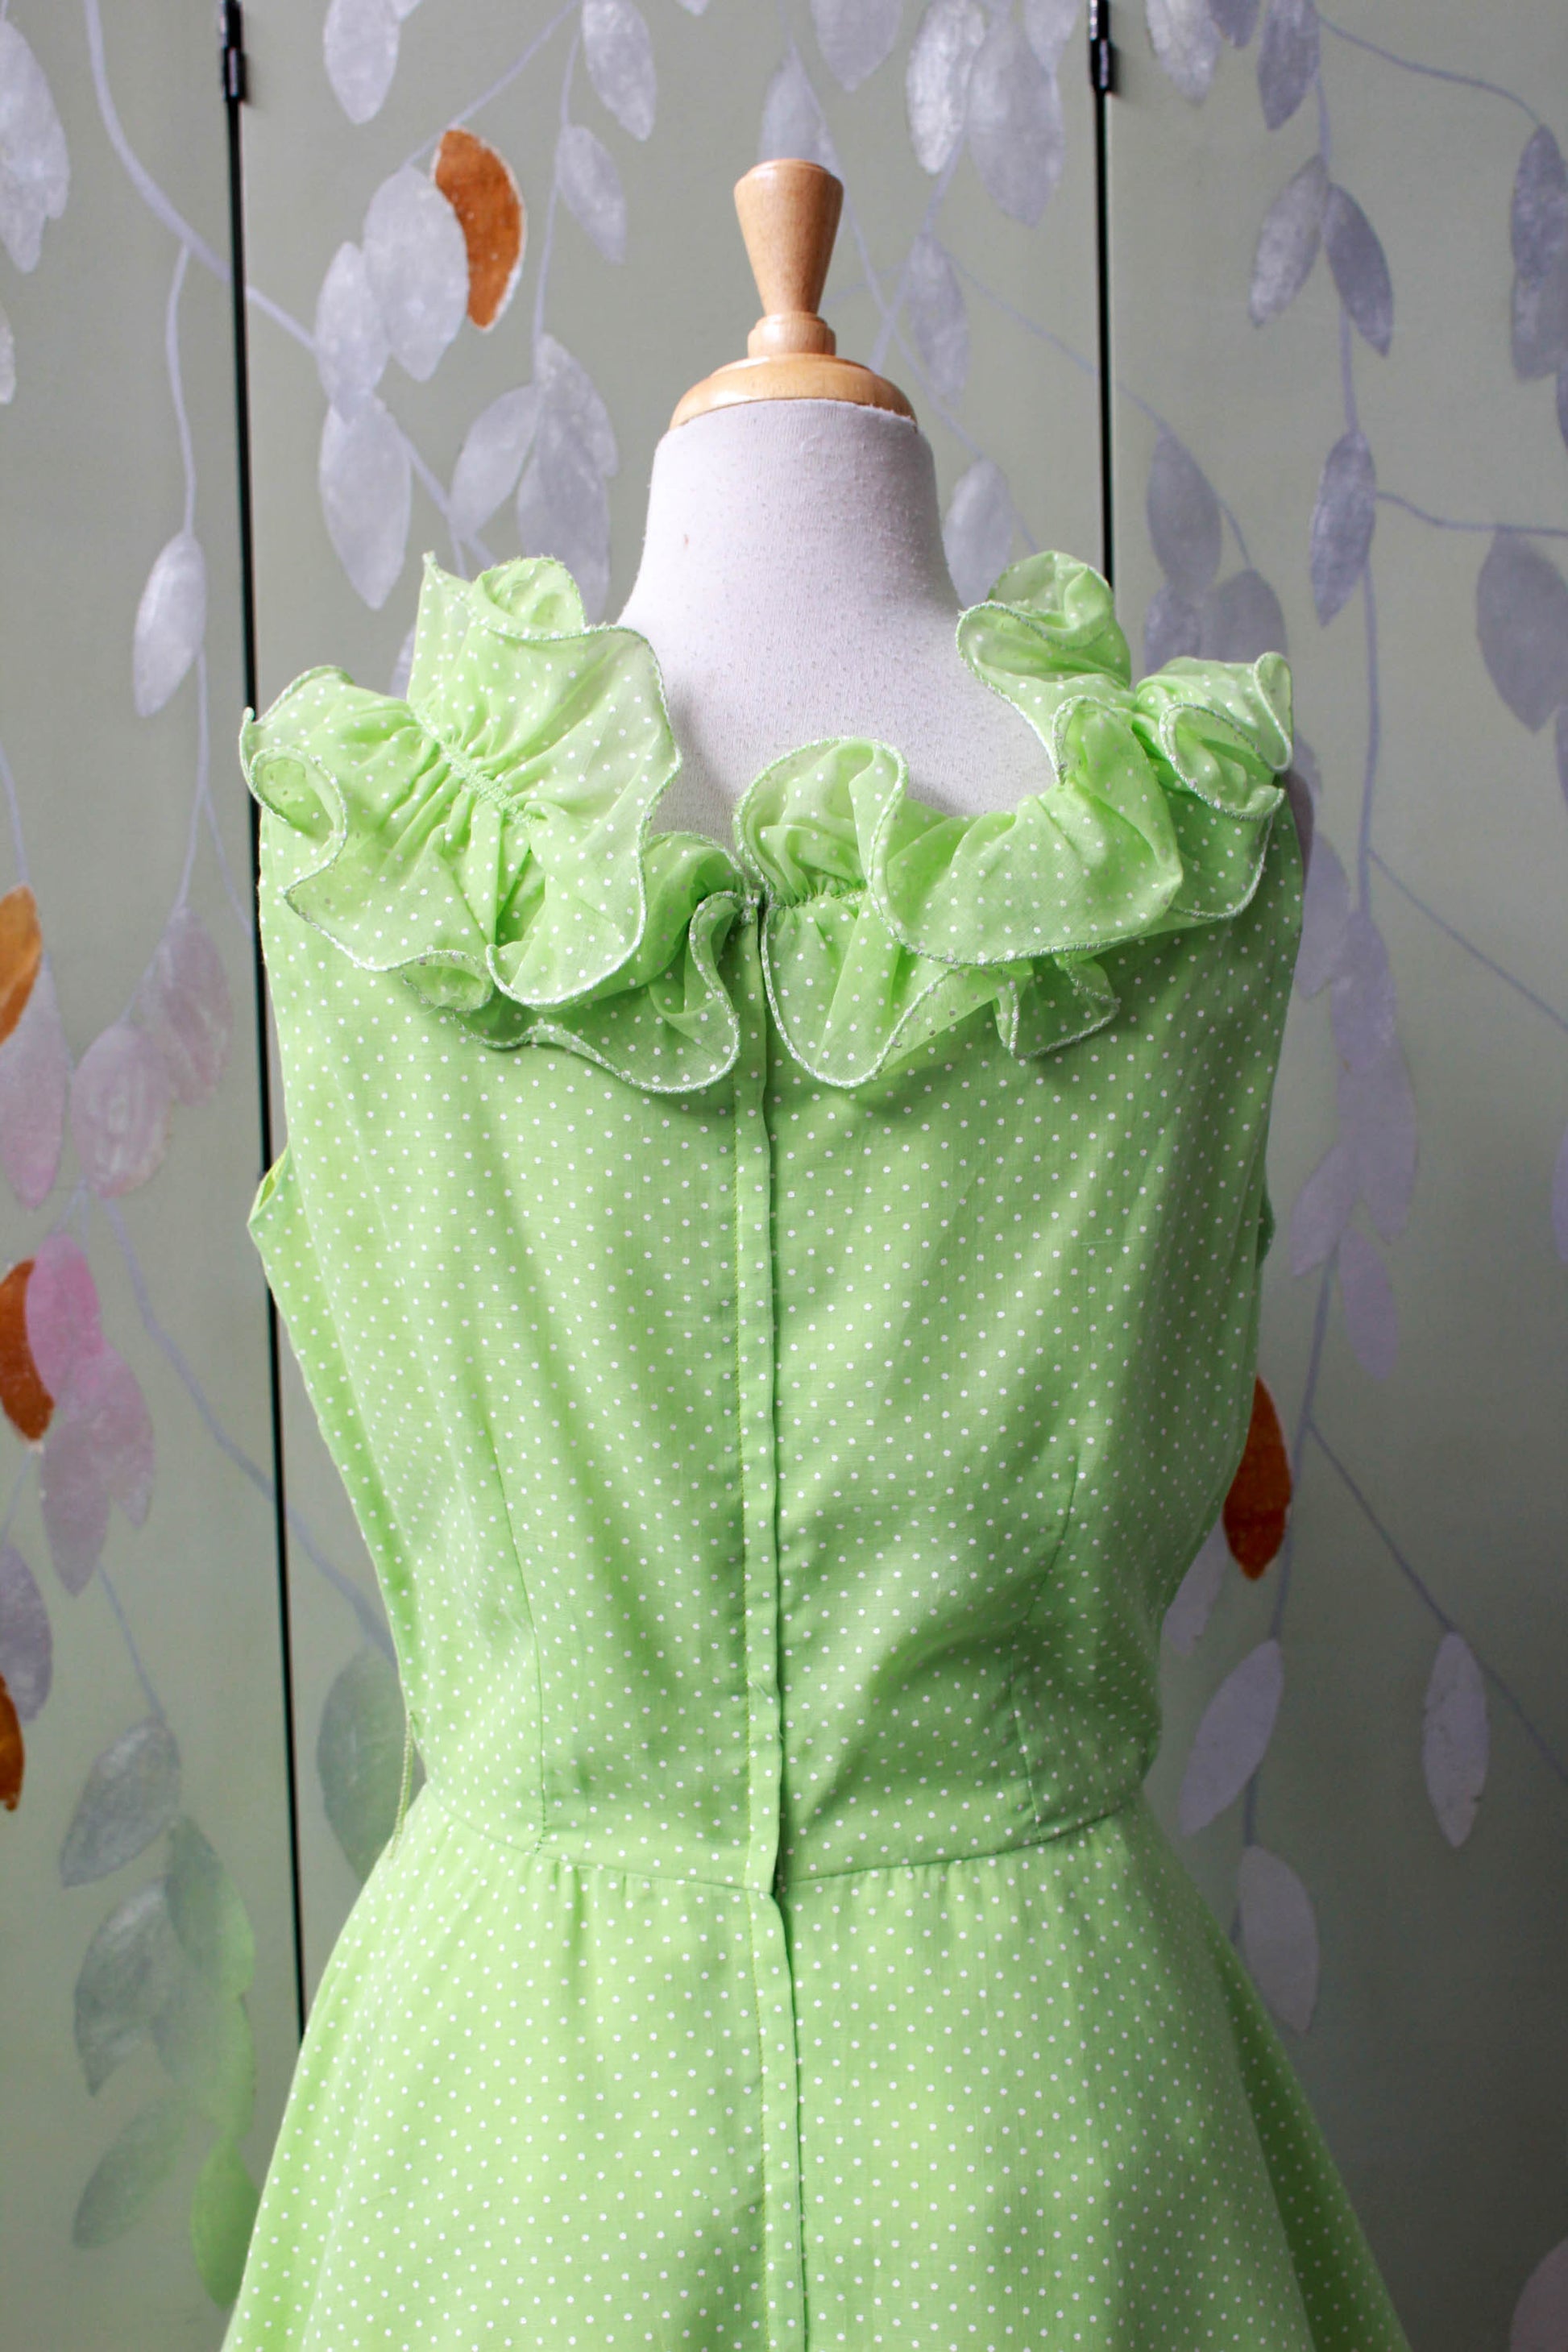 1960s lime green and white polka dot print fit and flare dress with ruffled collar, sleeveless, cotton blend summer vintage dress